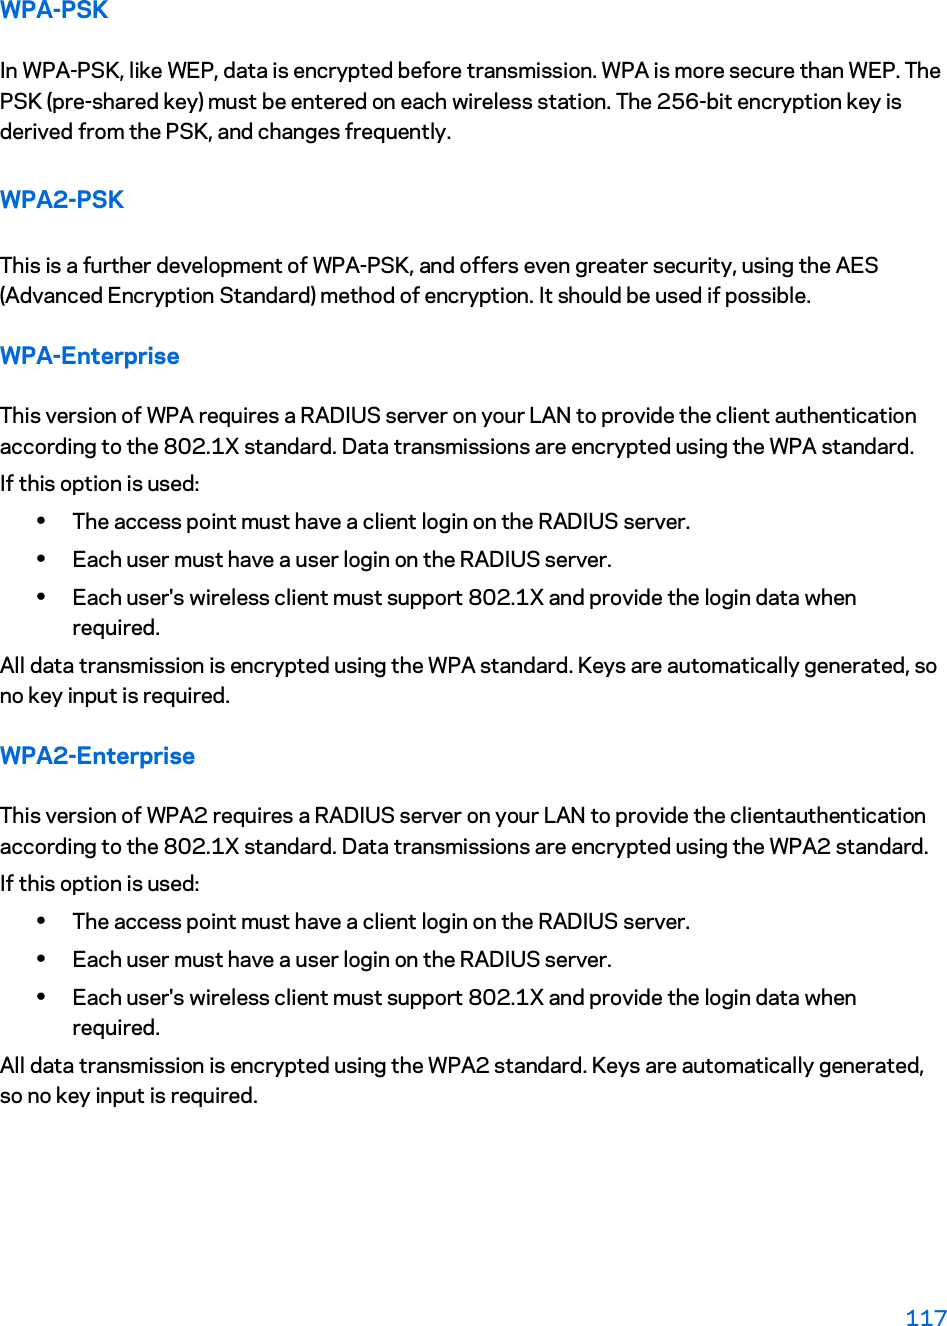 WPA-PSK In WPA-PSK, like WEP, data is encrypted before transmission. WPA is more secure than WEP. The PSK (pre-shared key) must be entered on each wireless station. The 256-bit encryption key is derived from the PSK, and changes frequently. WPA2-PSK This is a further development of WPA-PSK, and offers even greater security, using the AES (Advanced Encryption Standard) method of encryption. It should be used if possible. WPA-Enterprise This version of WPA requires a RADIUS server on your LAN to provide the client authentication according to the 802.1X standard. Data transmissions are encrypted using the WPA standard.  If this option is used:  xThe access point must have a client login on the RADIUS server.  xEach user must have a user login on the RADIUS server.  xEach user&apos;s wireless client must support 802.1X and provide the login data when required.  All data transmission is encrypted using the WPA standard. Keys are automatically generated, so no key input is required. WPA2-Enterprise This version of WPA2 requires a RADIUS server on your LAN to provide the clientauthentication according to the 802.1X standard. Data transmissions are encrypted using the WPA2 standard.  If this option is used:  xThe access point must have a client login on the RADIUS server.  xEach user must have a user login on the RADIUS server.  xEach user&apos;s wireless client must support 802.1X and provide the login data when required.  All data transmission is encrypted using the WPA2 standard. Keys are automatically generated, so no key input is required. 117 